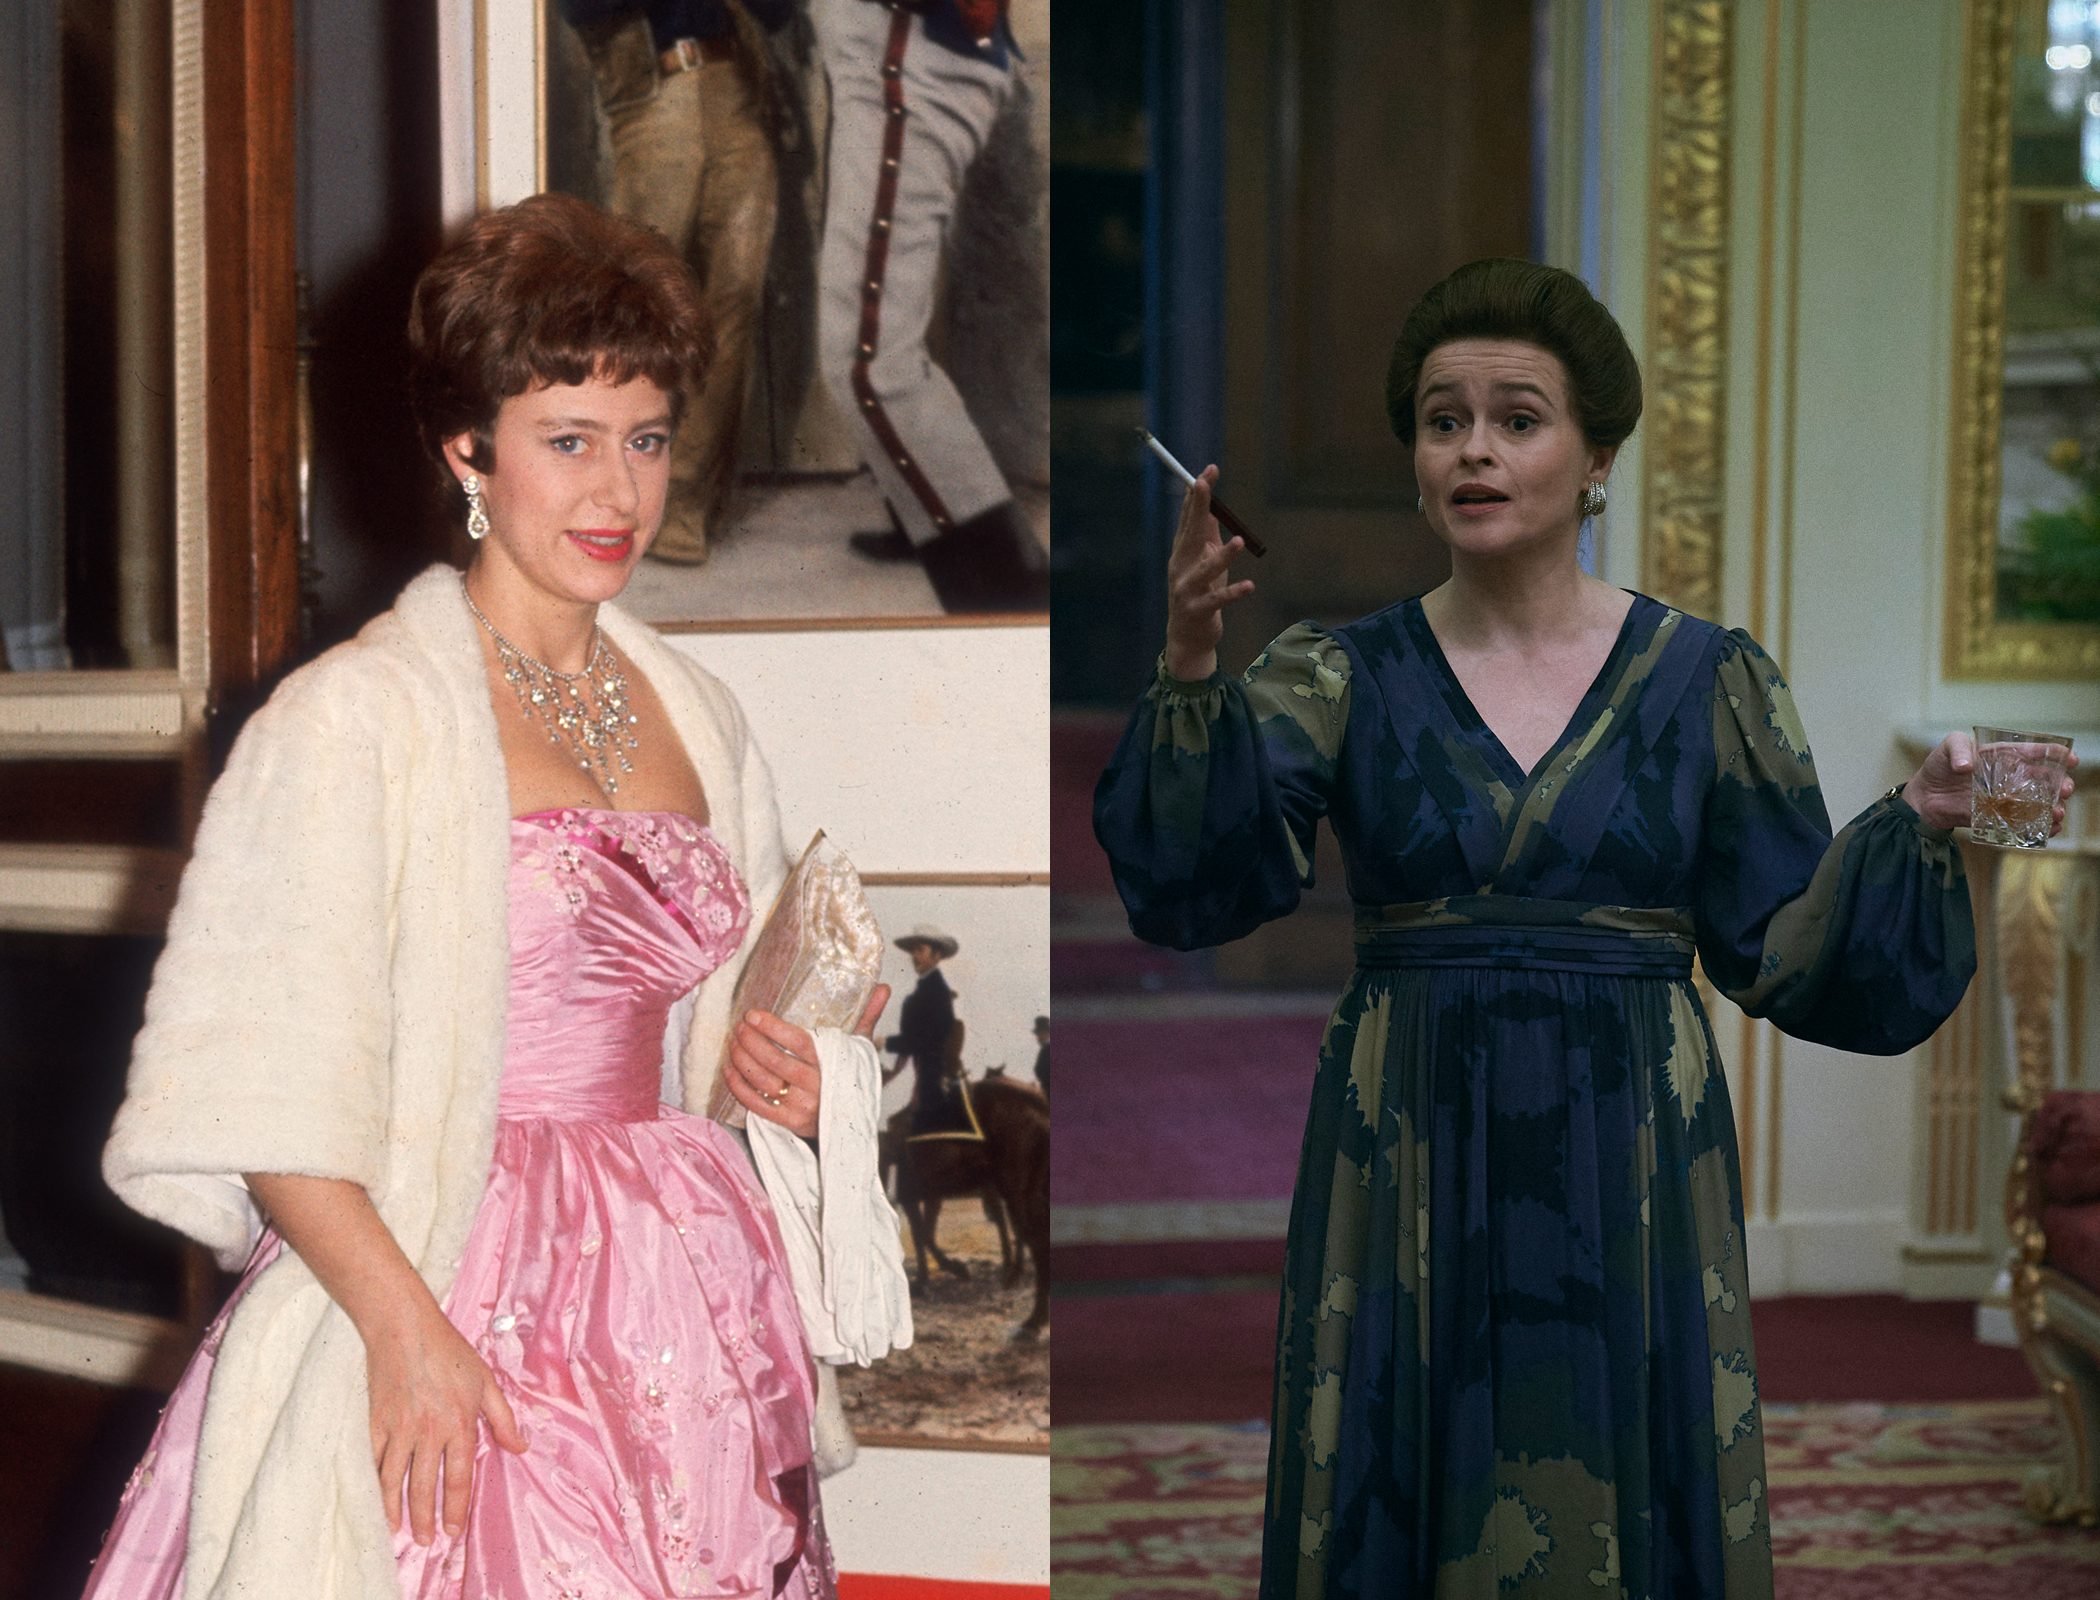 Princess Margaret in middle age, as played by Helena Bonham Carter